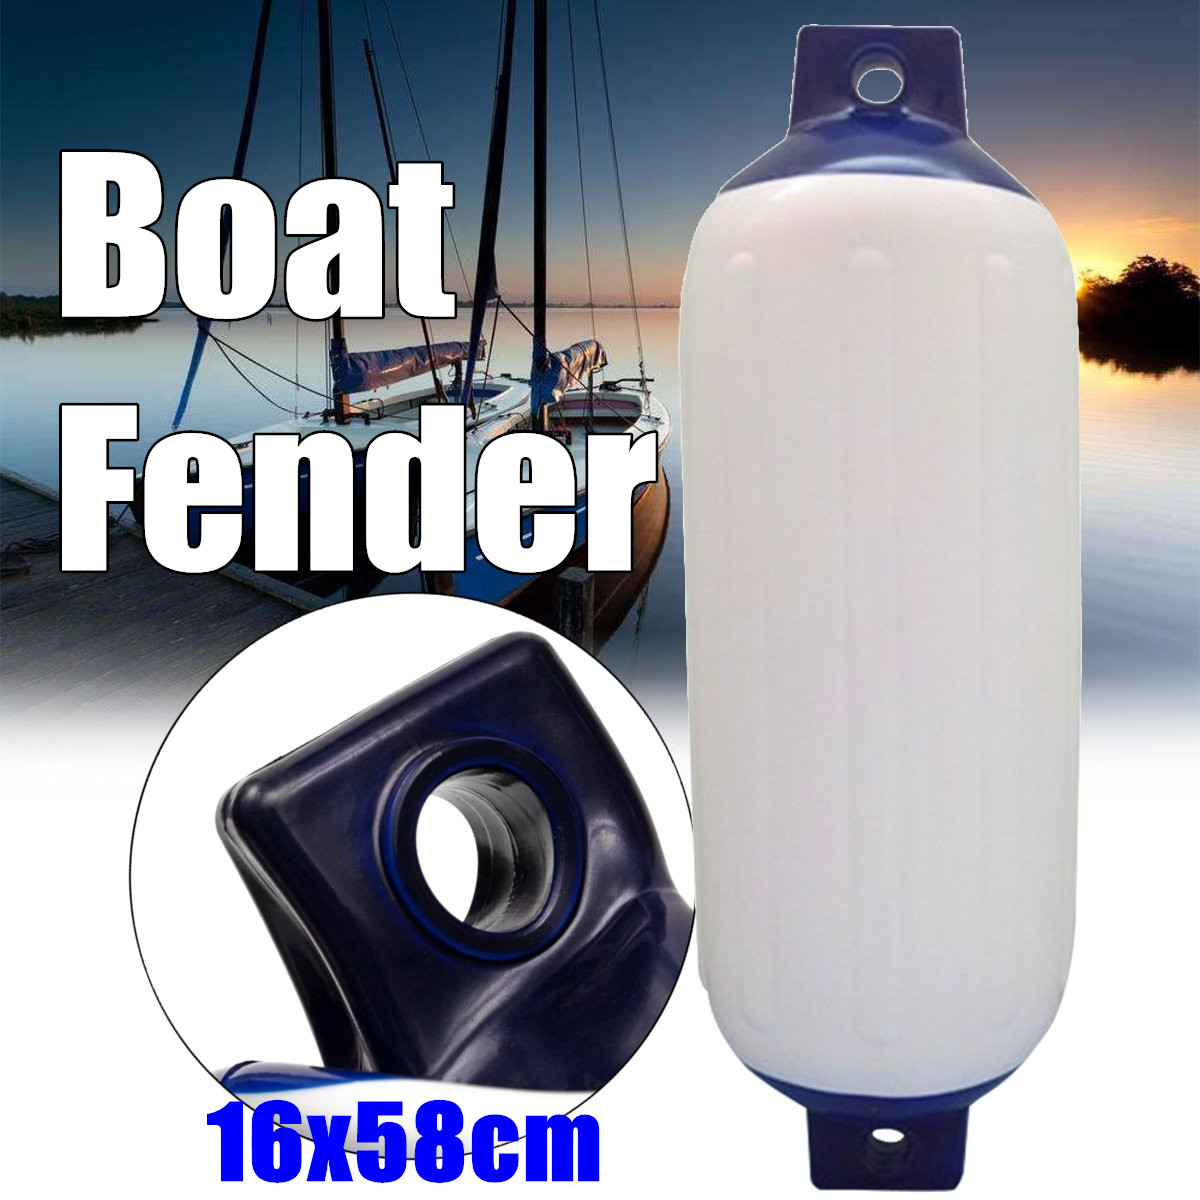 16x58cm-Boat-Water-Sport-Boating-Tools-Inflatable-Boat-Marine-Buffers-Mooring-1638528-1